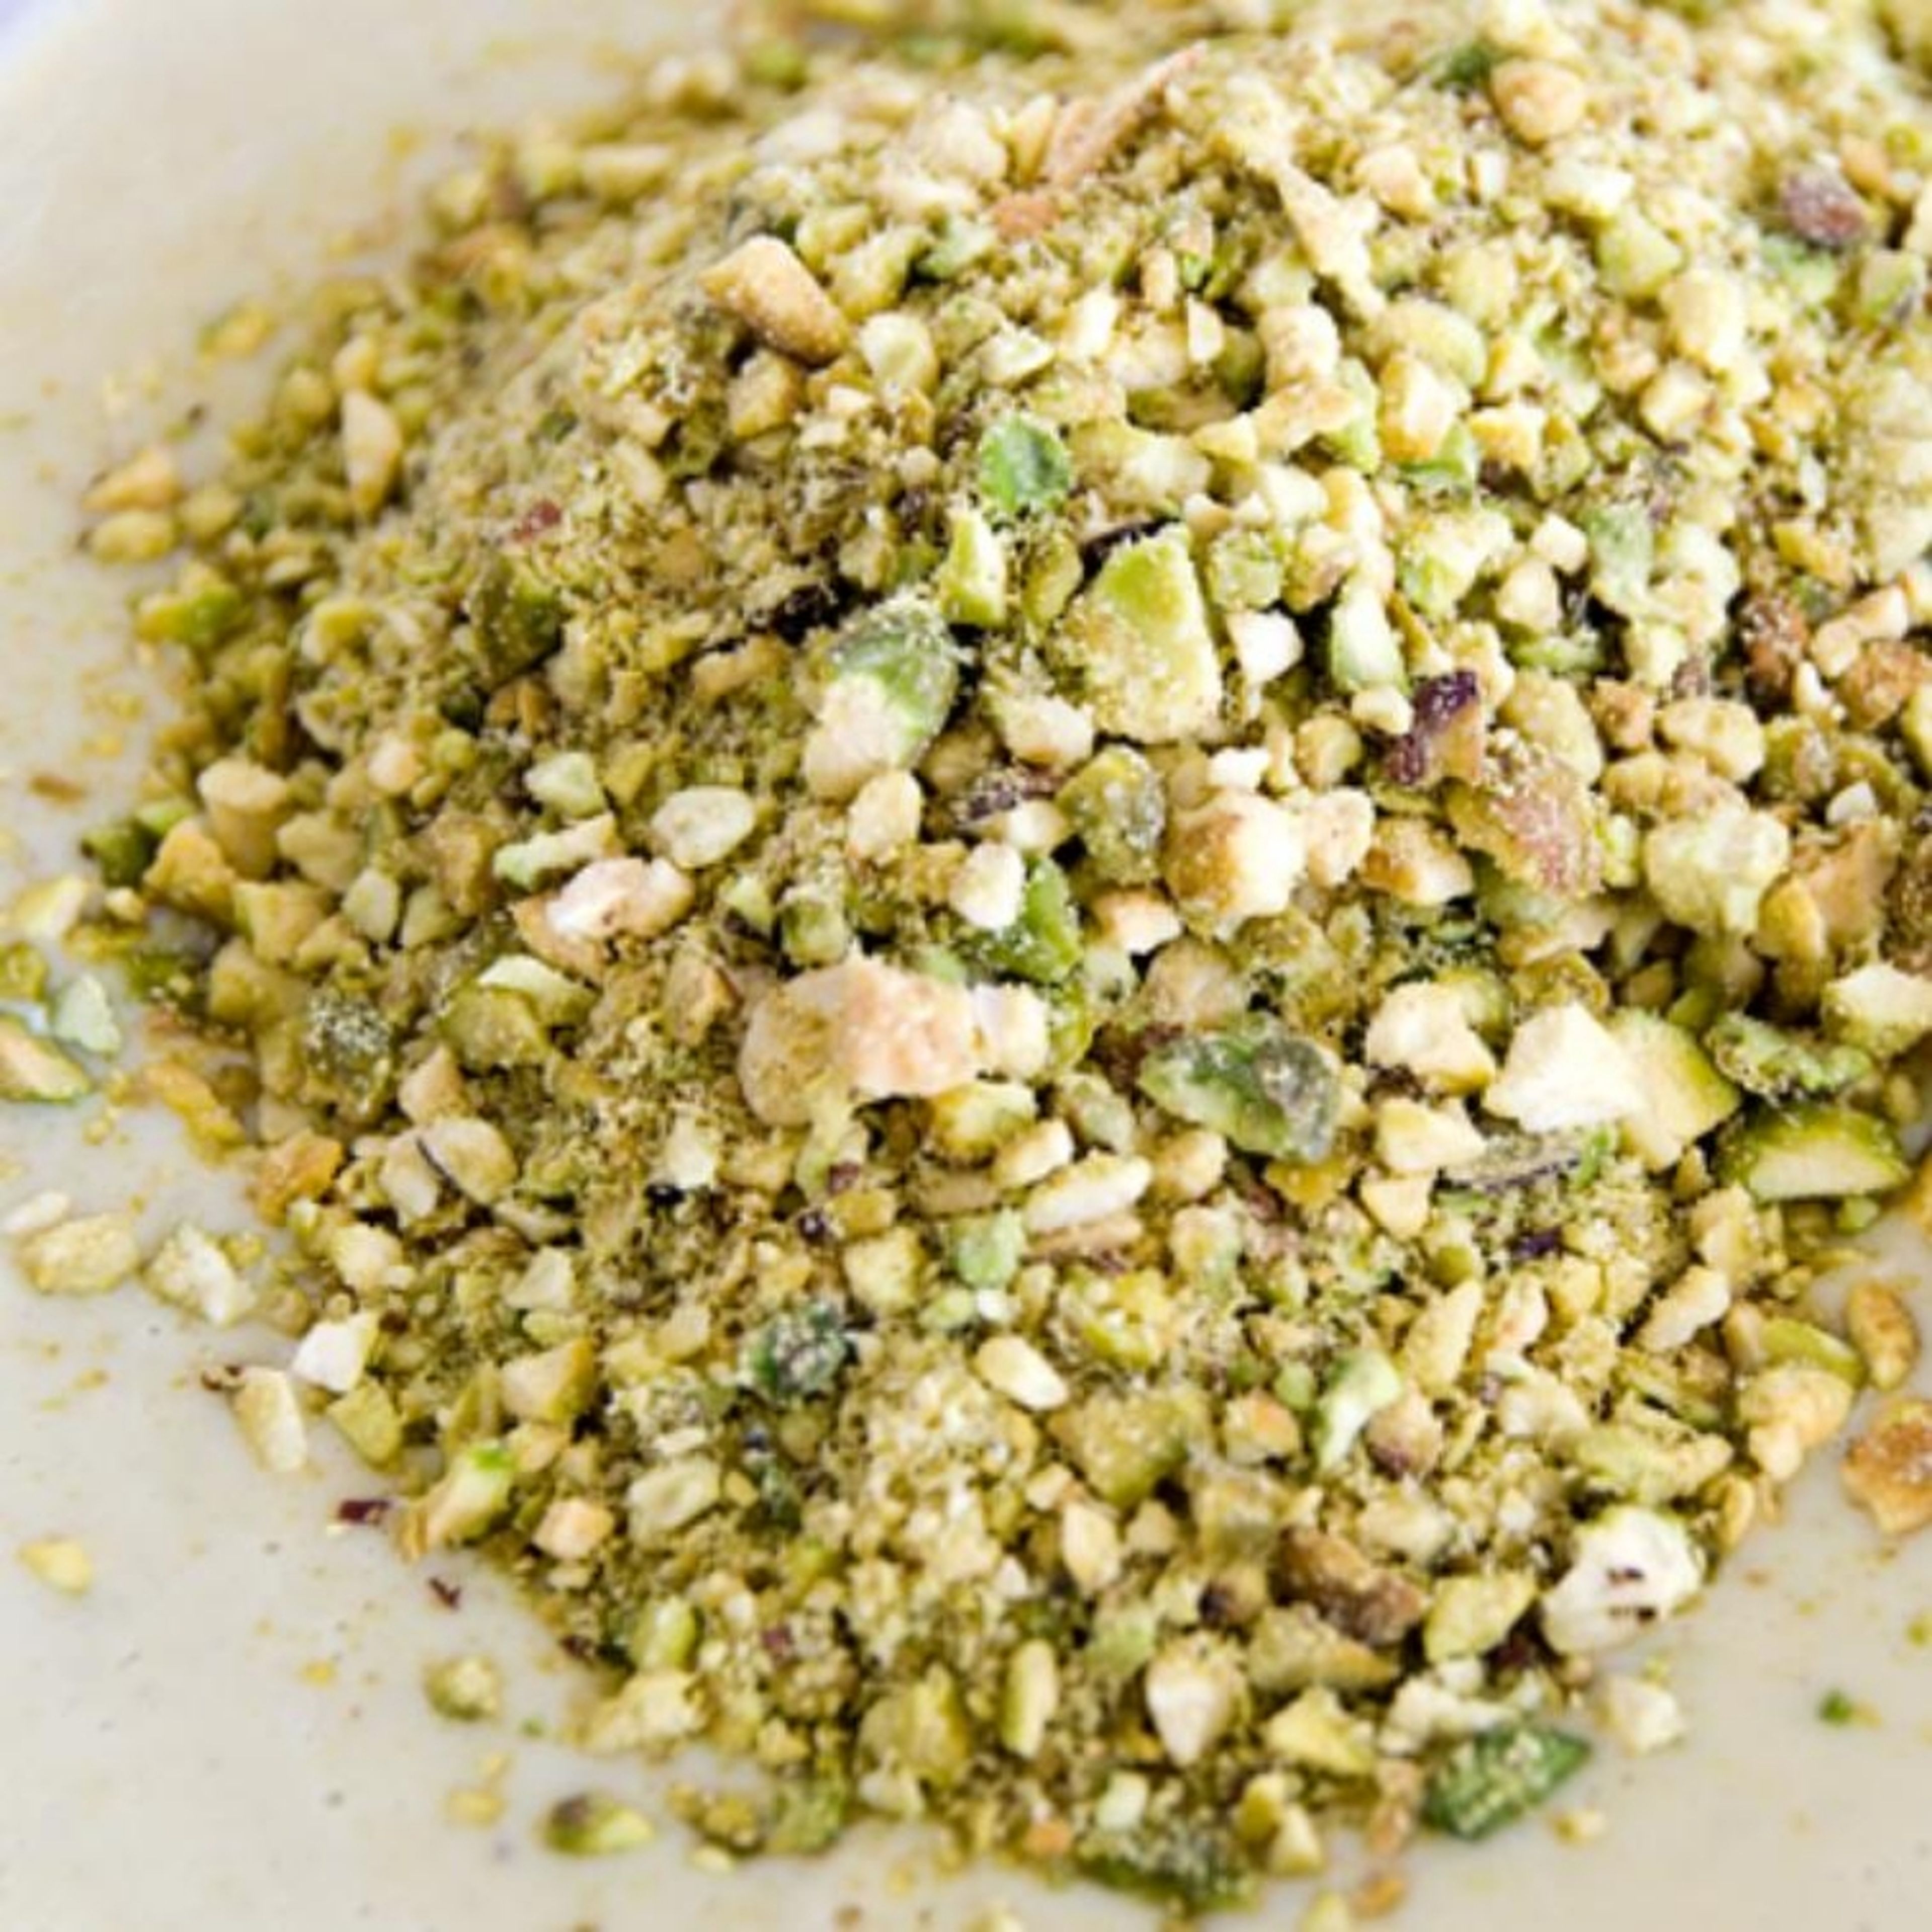 Chop the pistachios finely, or blitz in a food processor until in small chunks. Separate away 10 g of pistachios for garnish.